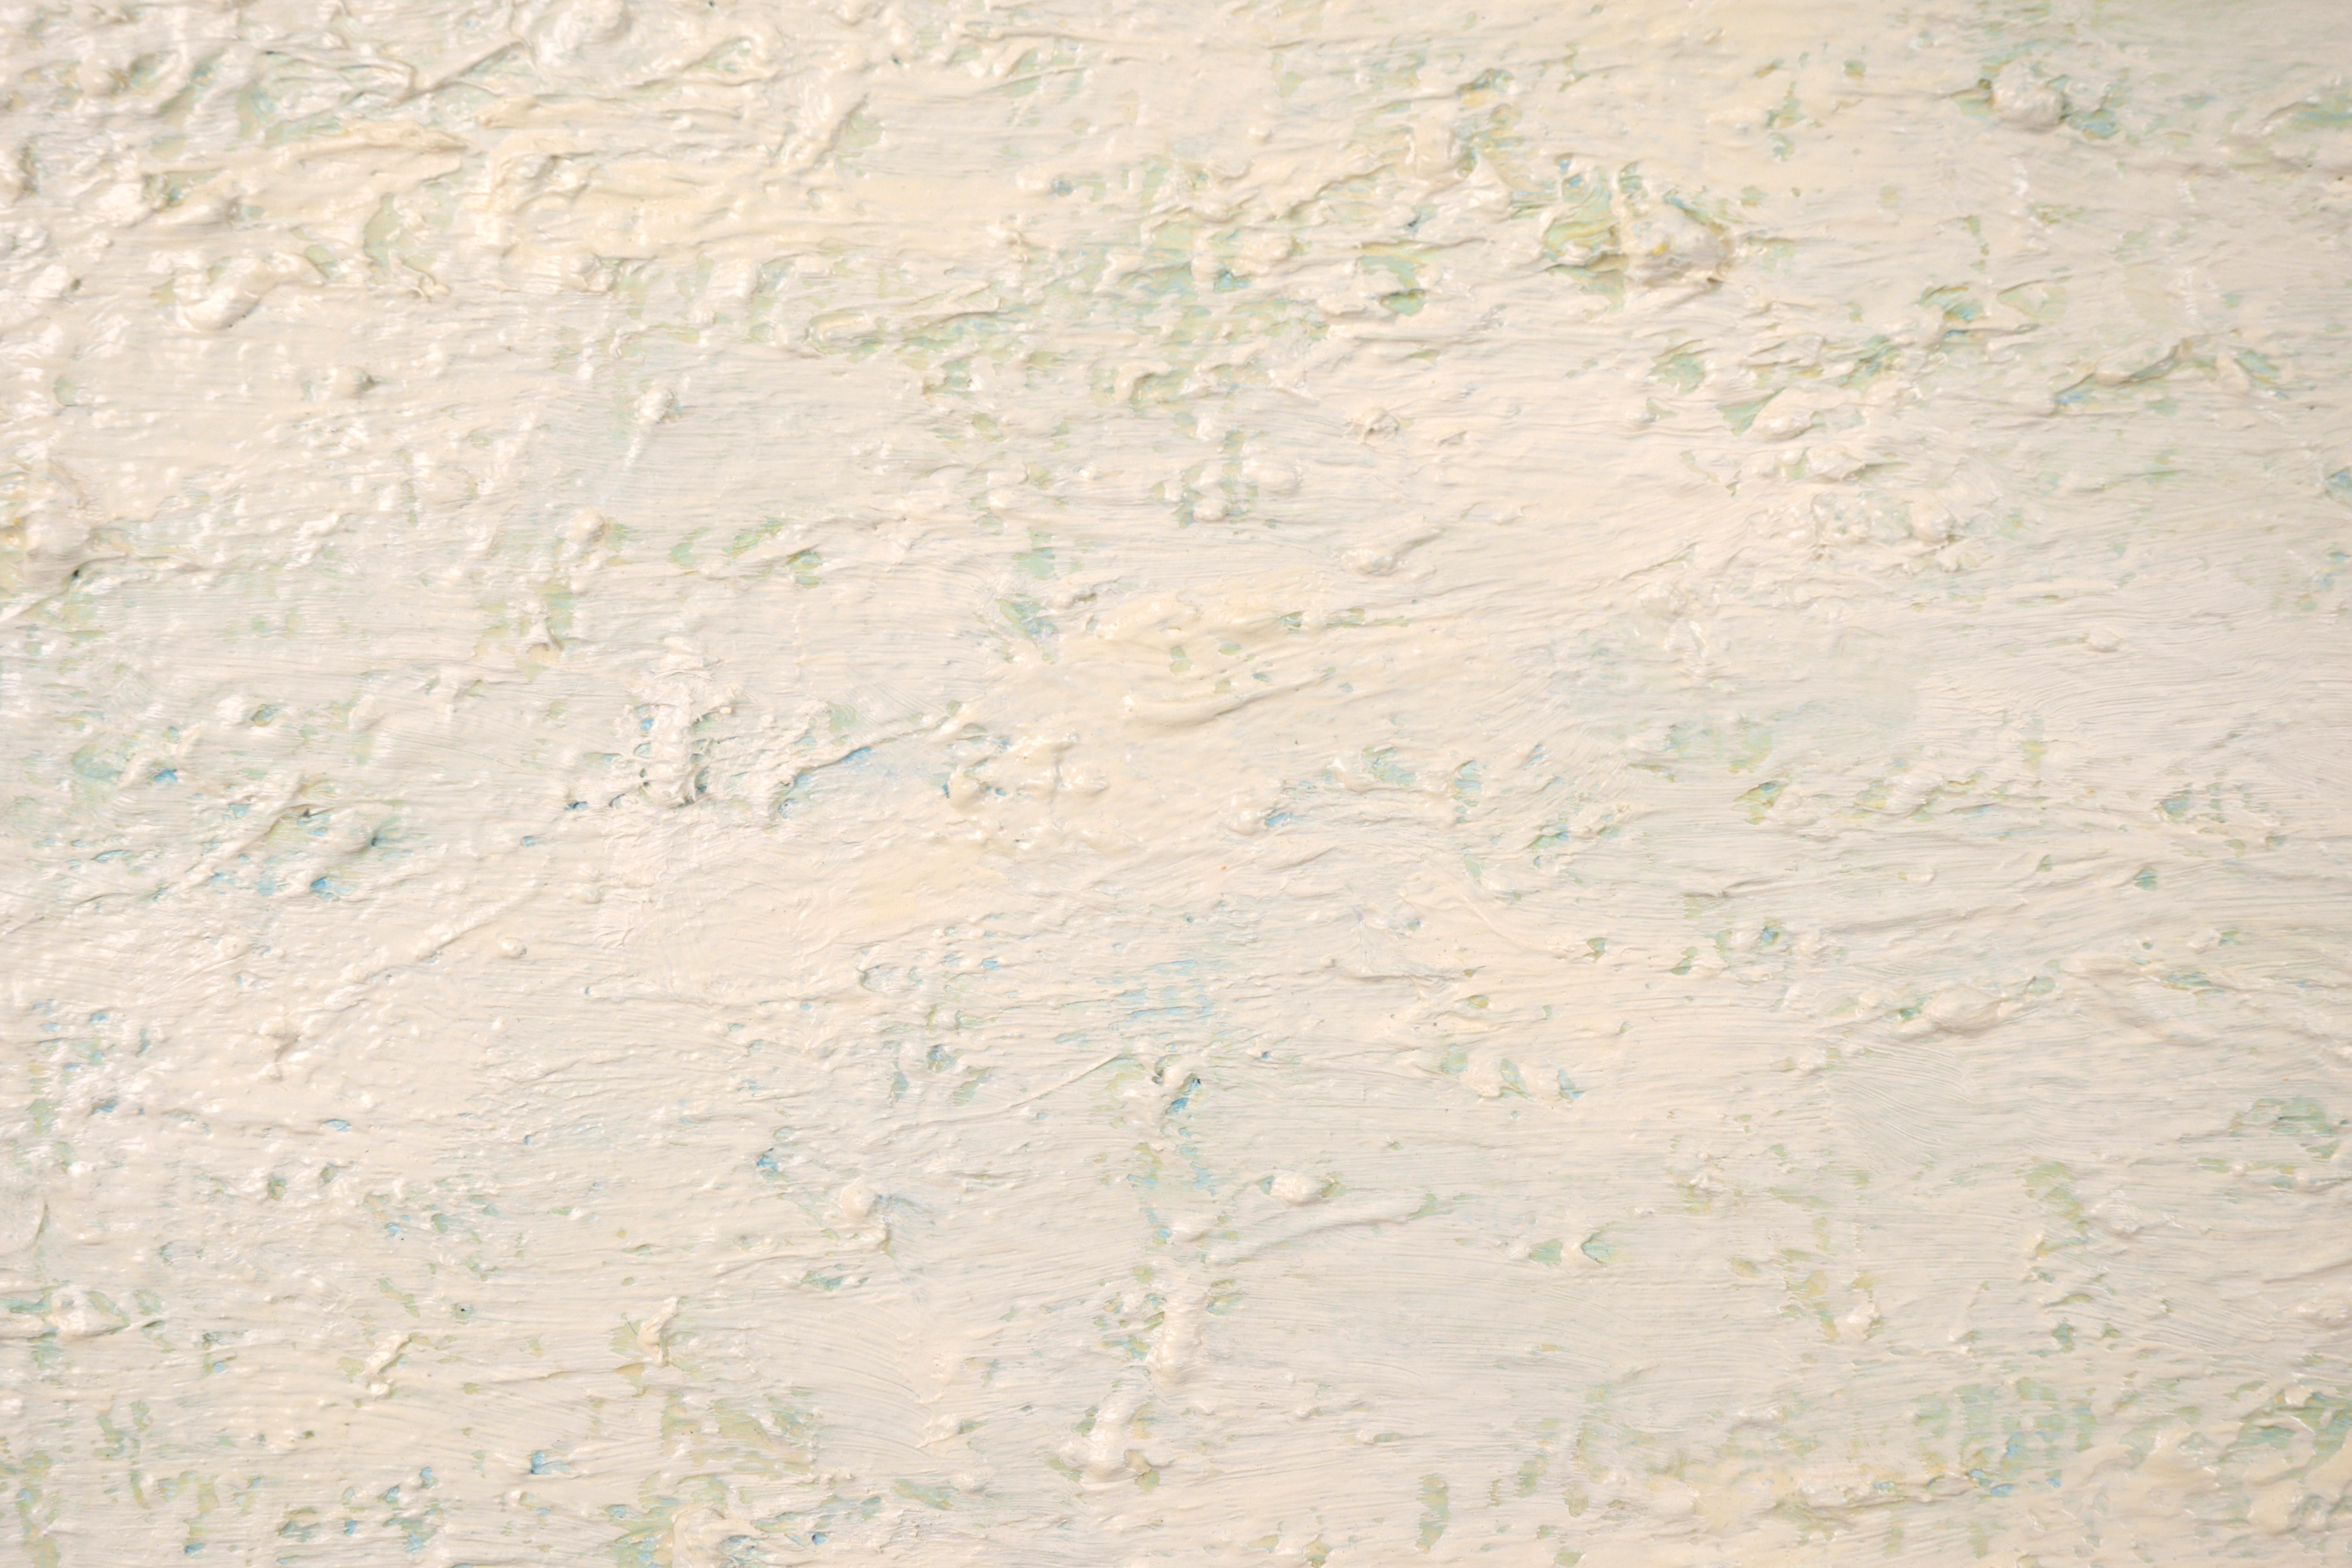 Contemporary Abstract Colorfield Landscape in Cream & Green - Color-Field Painting by Michael Pauker 